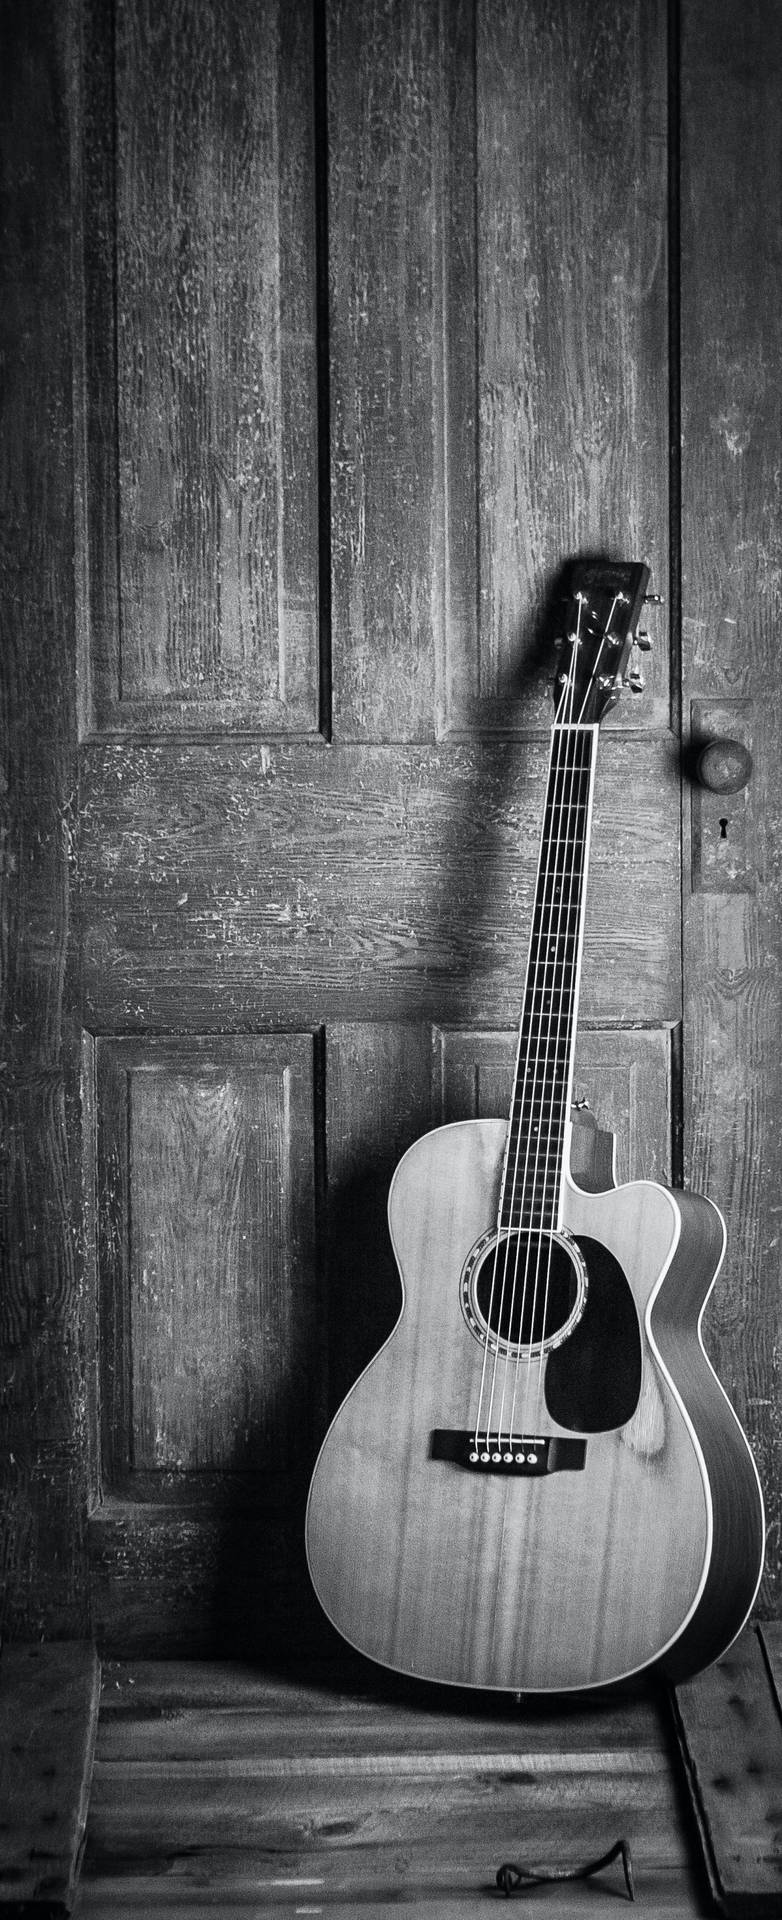 Download Coolest Iphone Black And White Guitar Wallpaper 